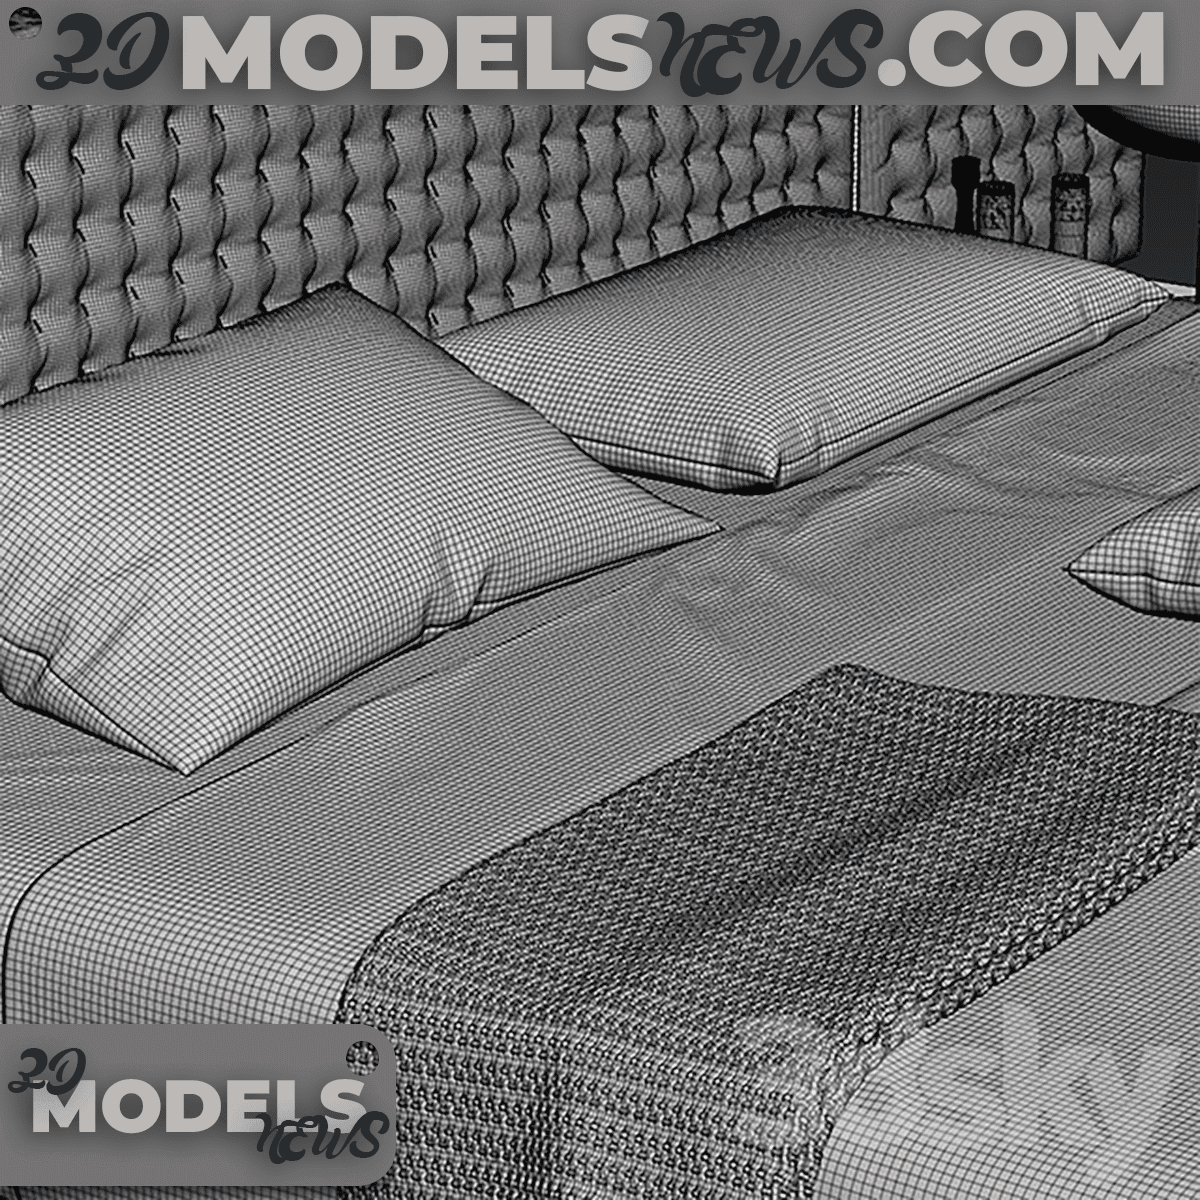 Full modern bed model with decoration 5